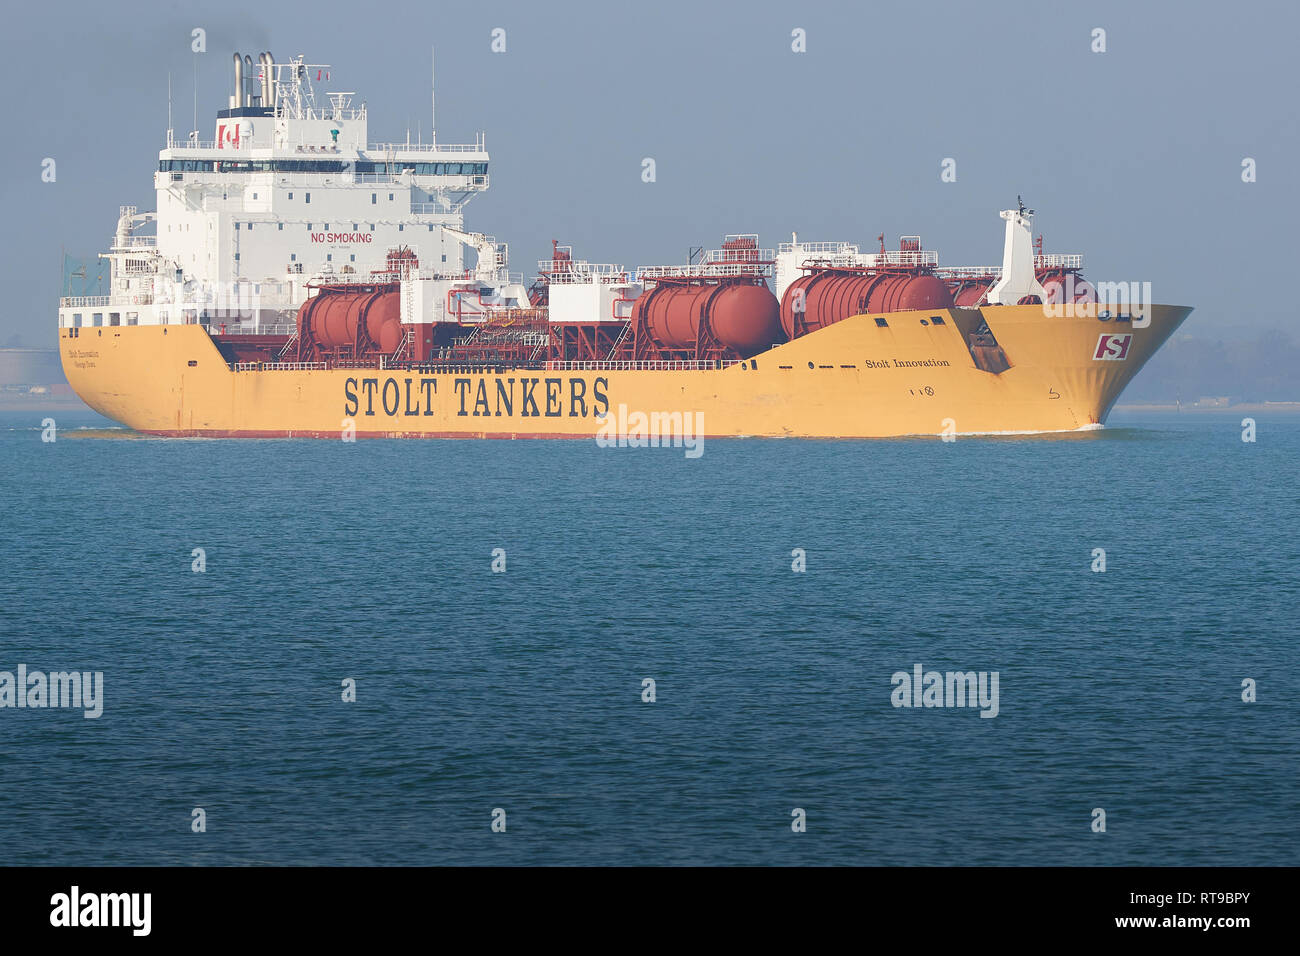 The Stolt Tankers, STOLT INNOVATION, Chemical/Oil Products Tanker, Departs the Fawley Oil Refinery, Southampton, UK, En Route To Houston, Texas, USA. Stock Photo